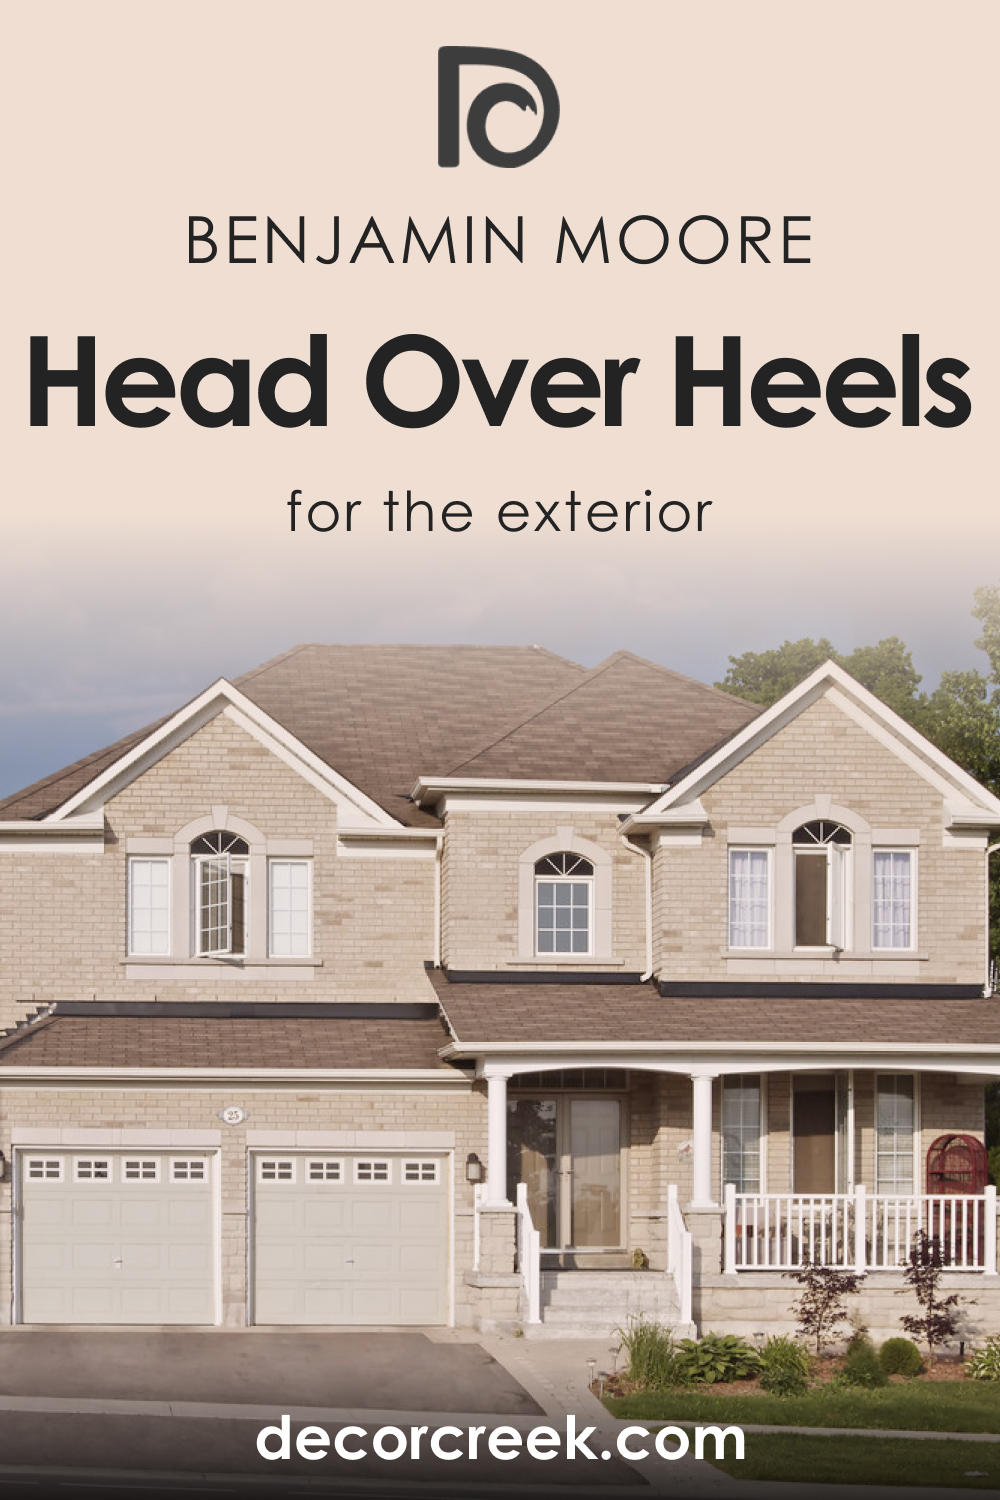 How to Use Head Over Heels AF-250 for an Exterior?